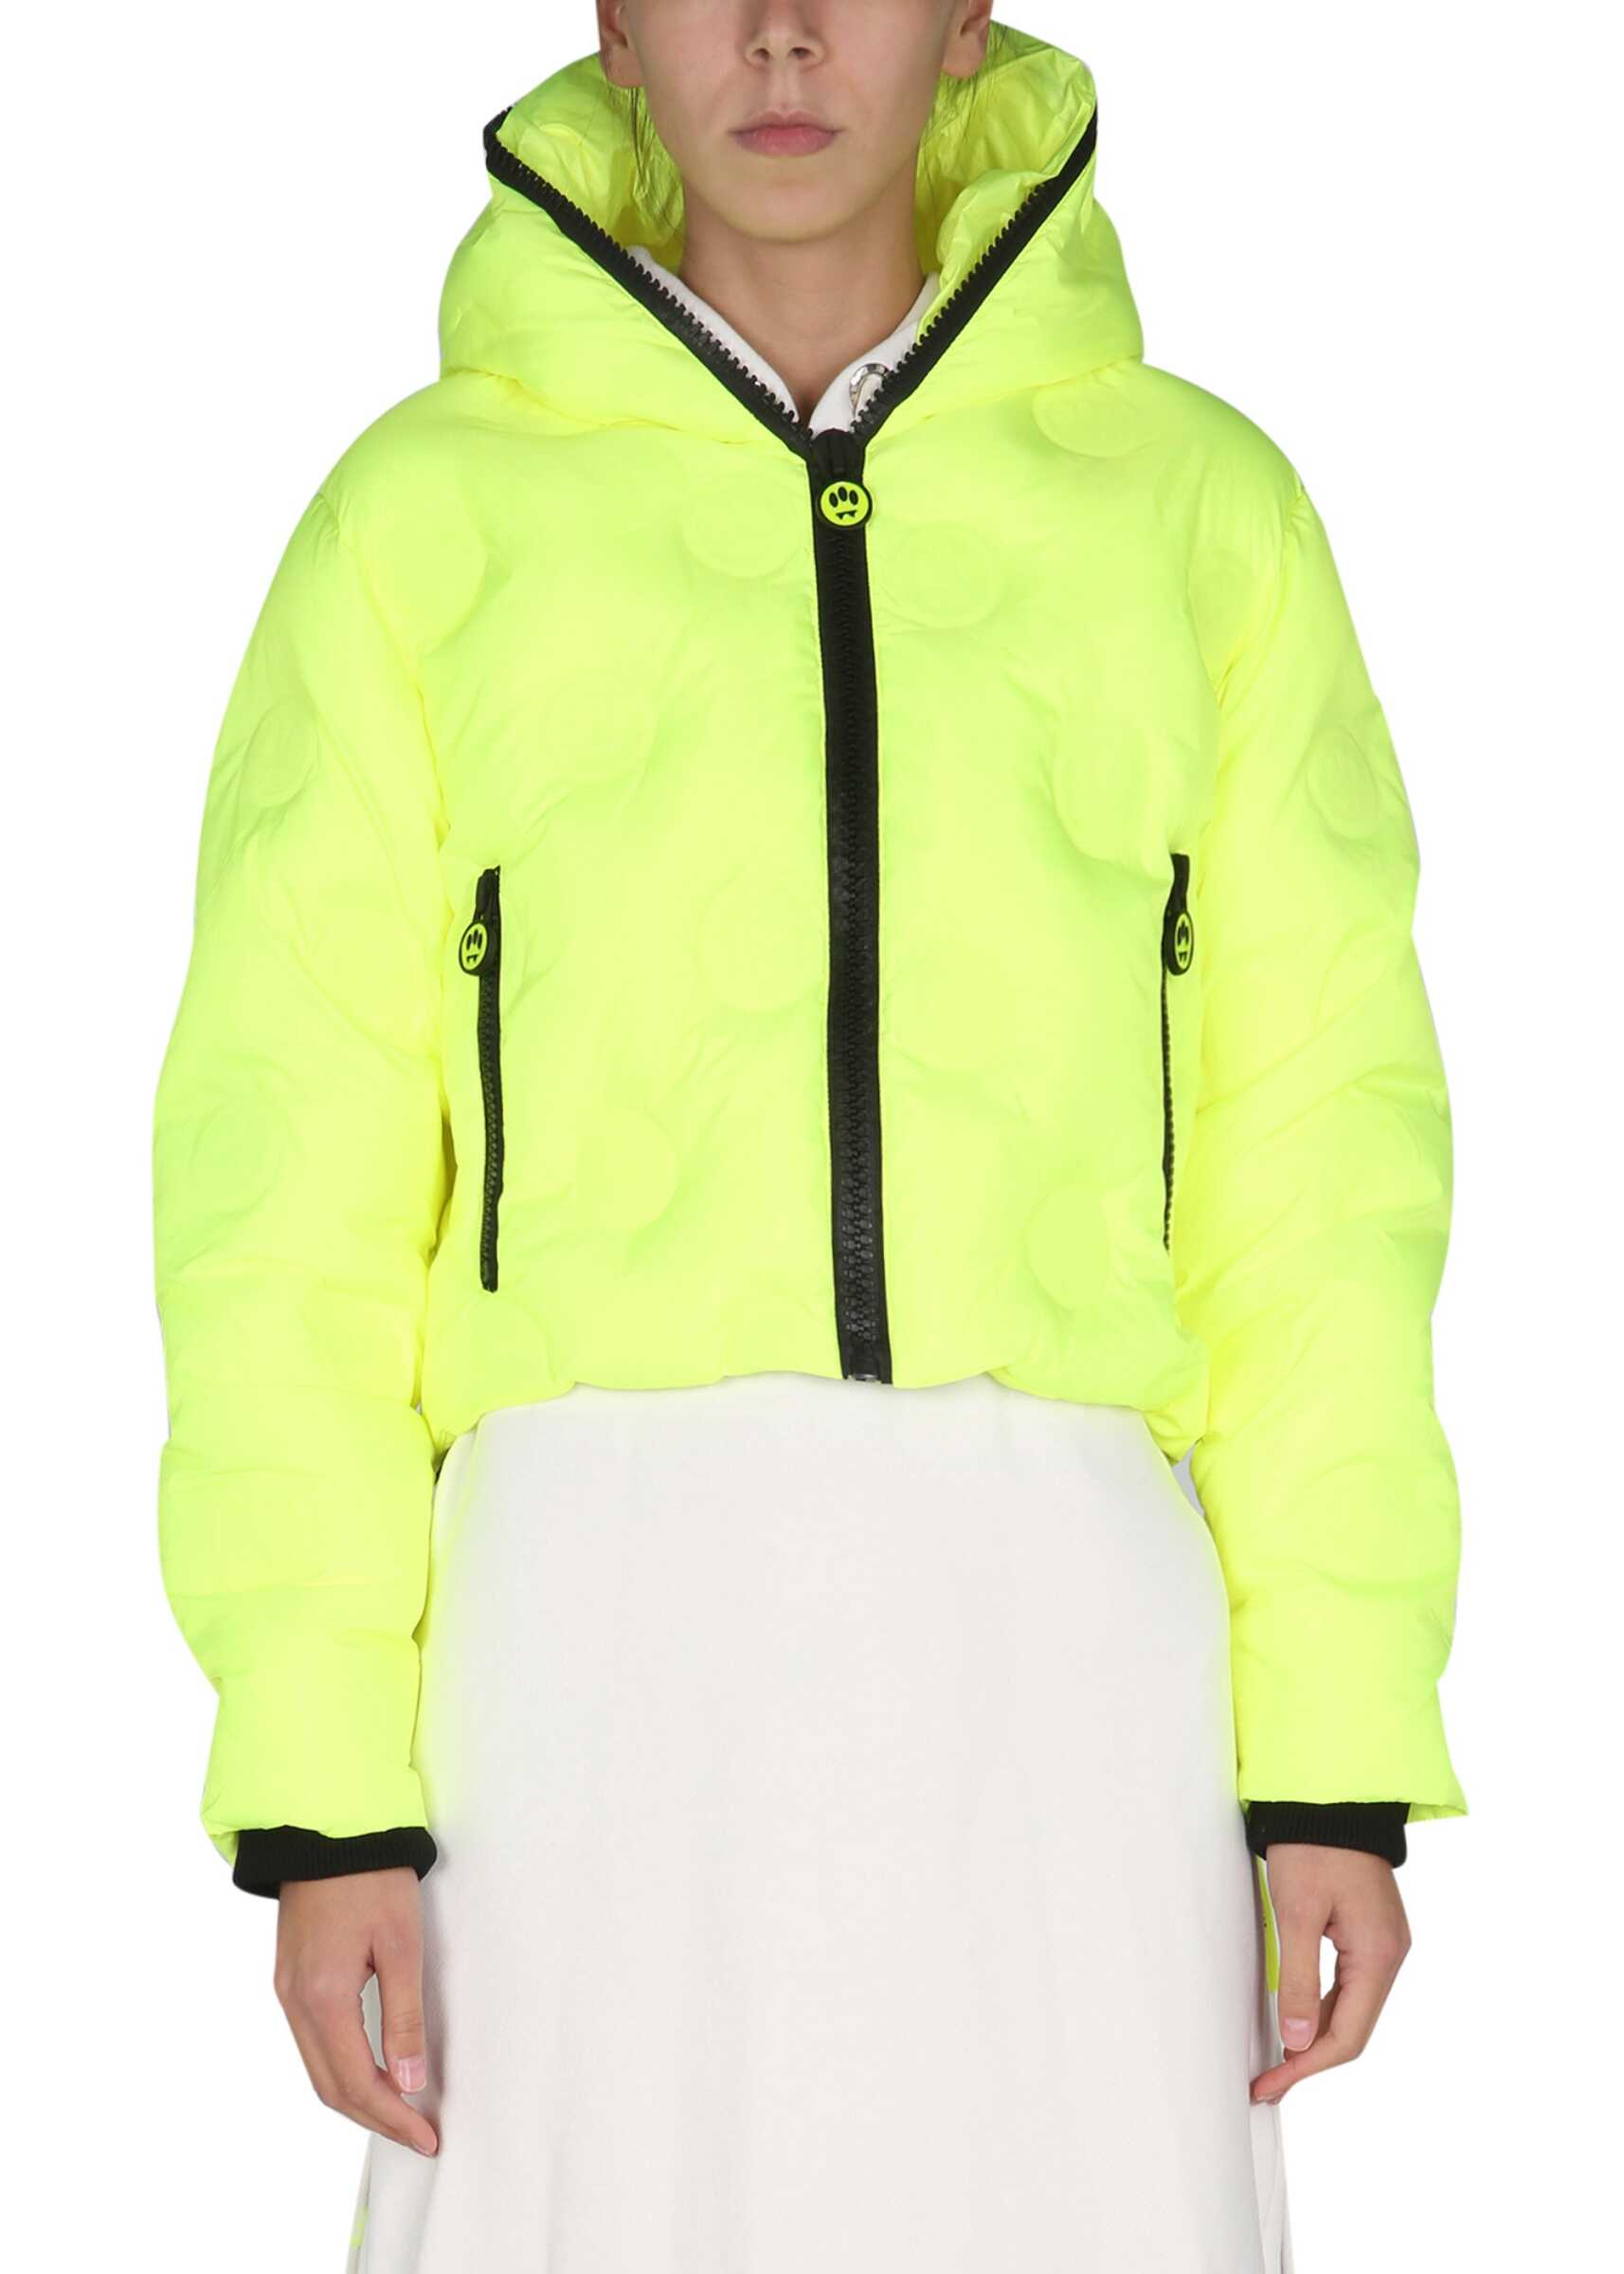 BARROW Cropped Down Jacket 030074_023 YELLOW image0